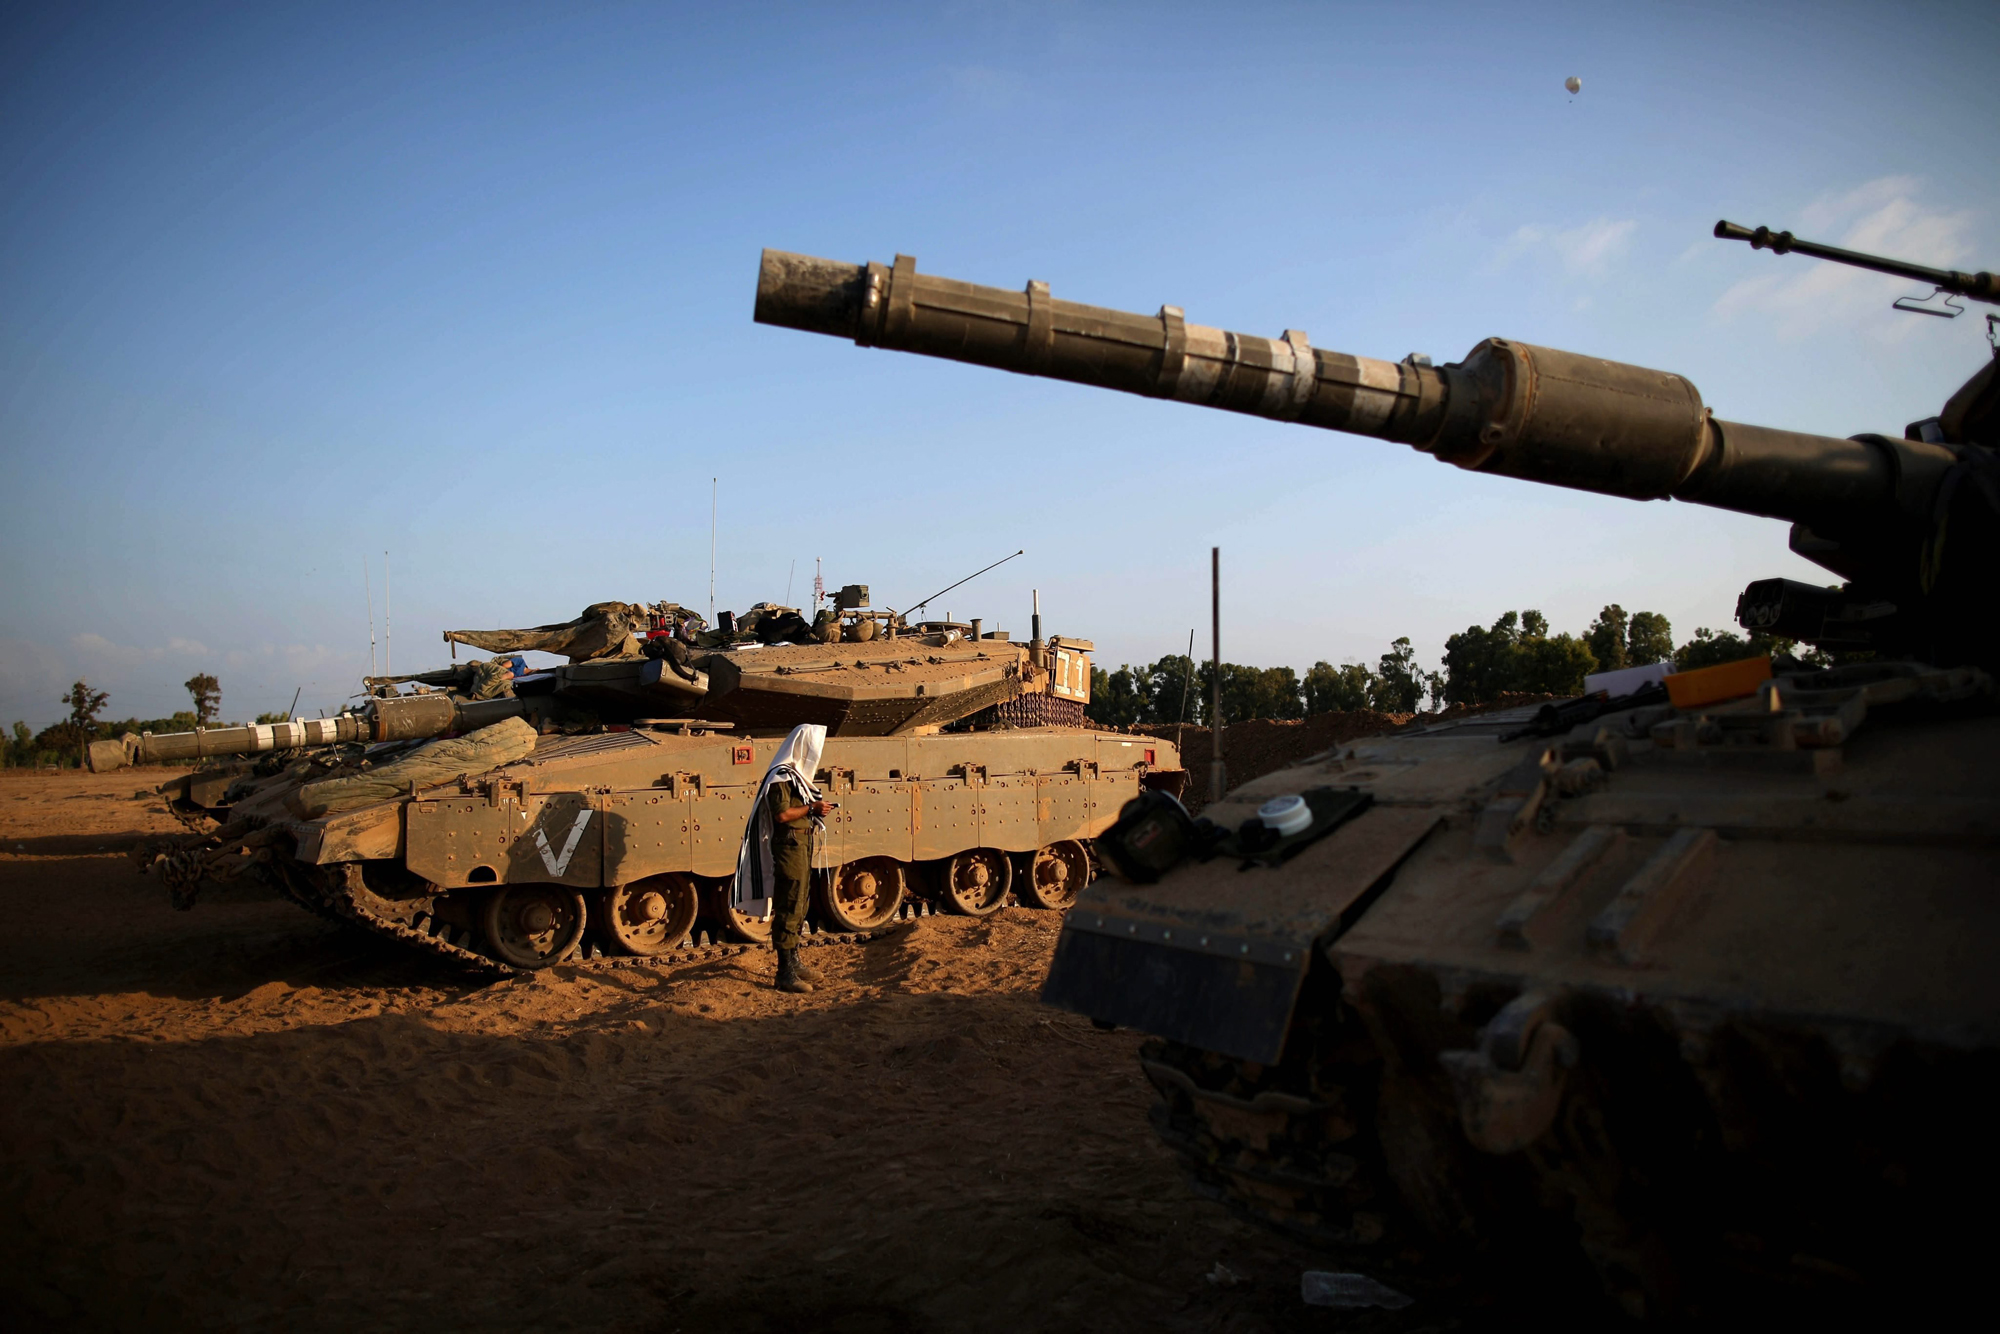 An Israeli soldier prays next to Merkava tanks at an unspecified location near the Israeli border with the Gaza Strip, Aug. 6, 2014.